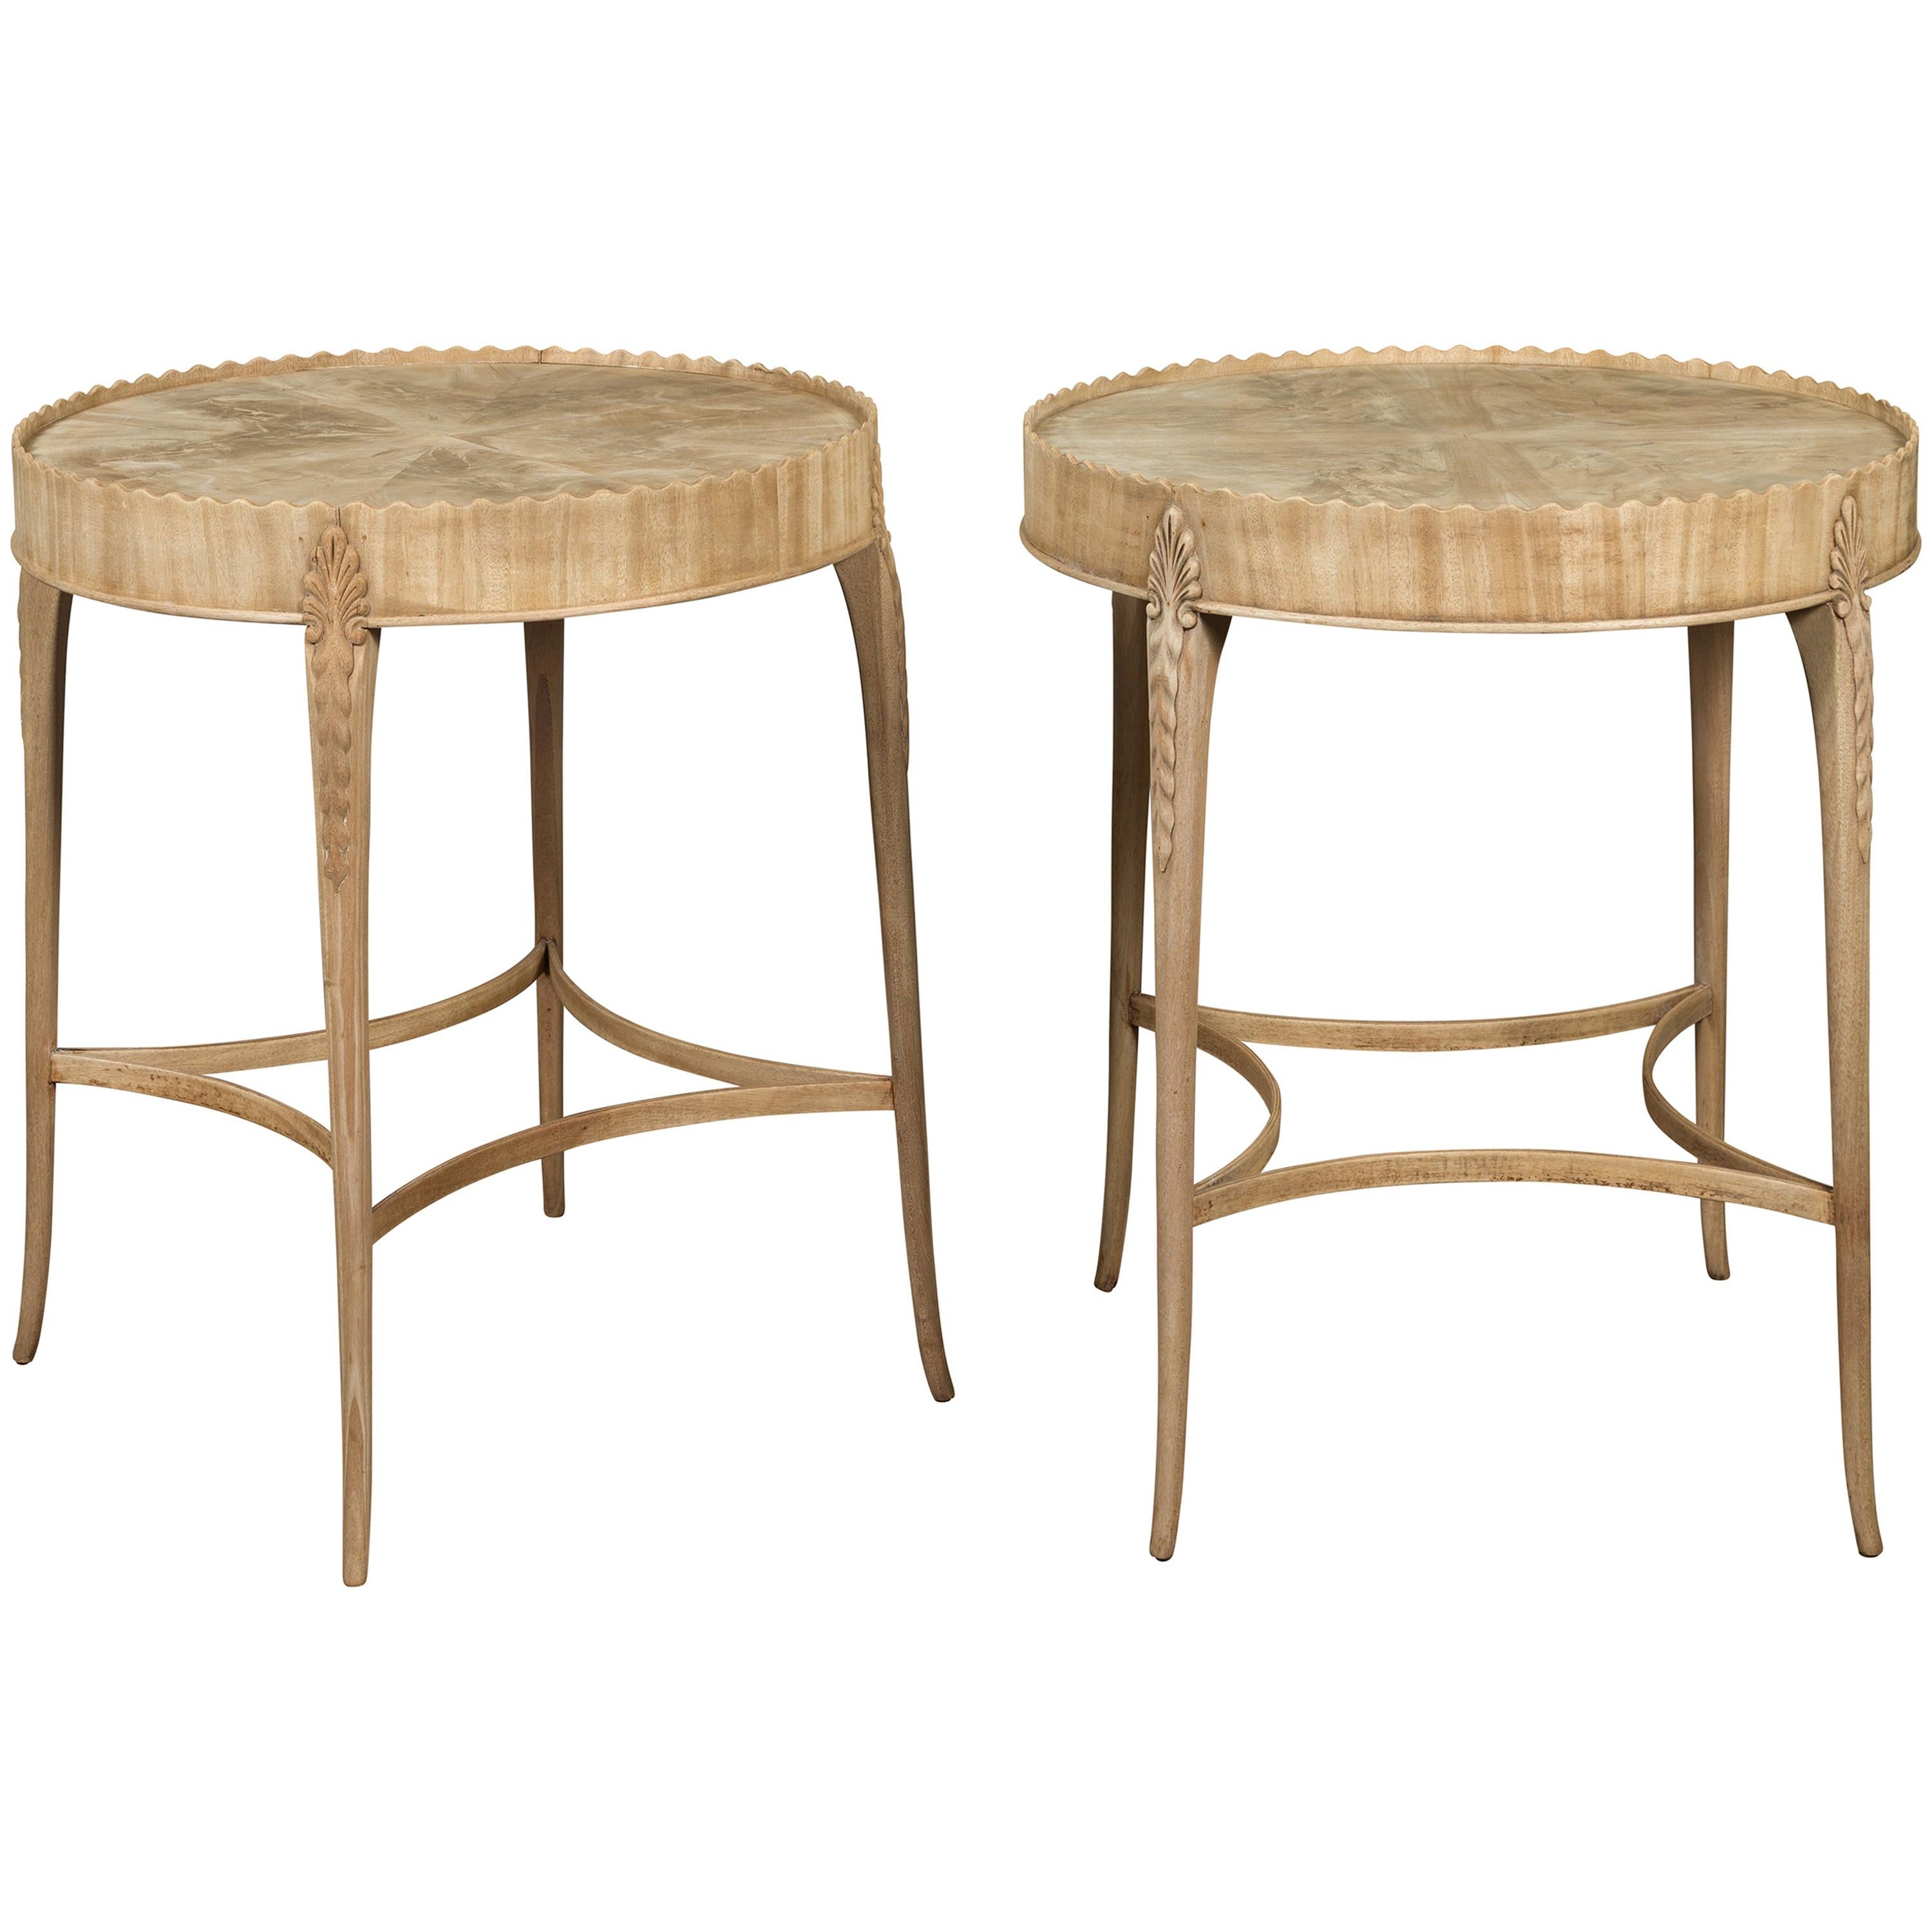 Pair of English Midcentury Bleached Mahogany Side Tables with Circular Tops